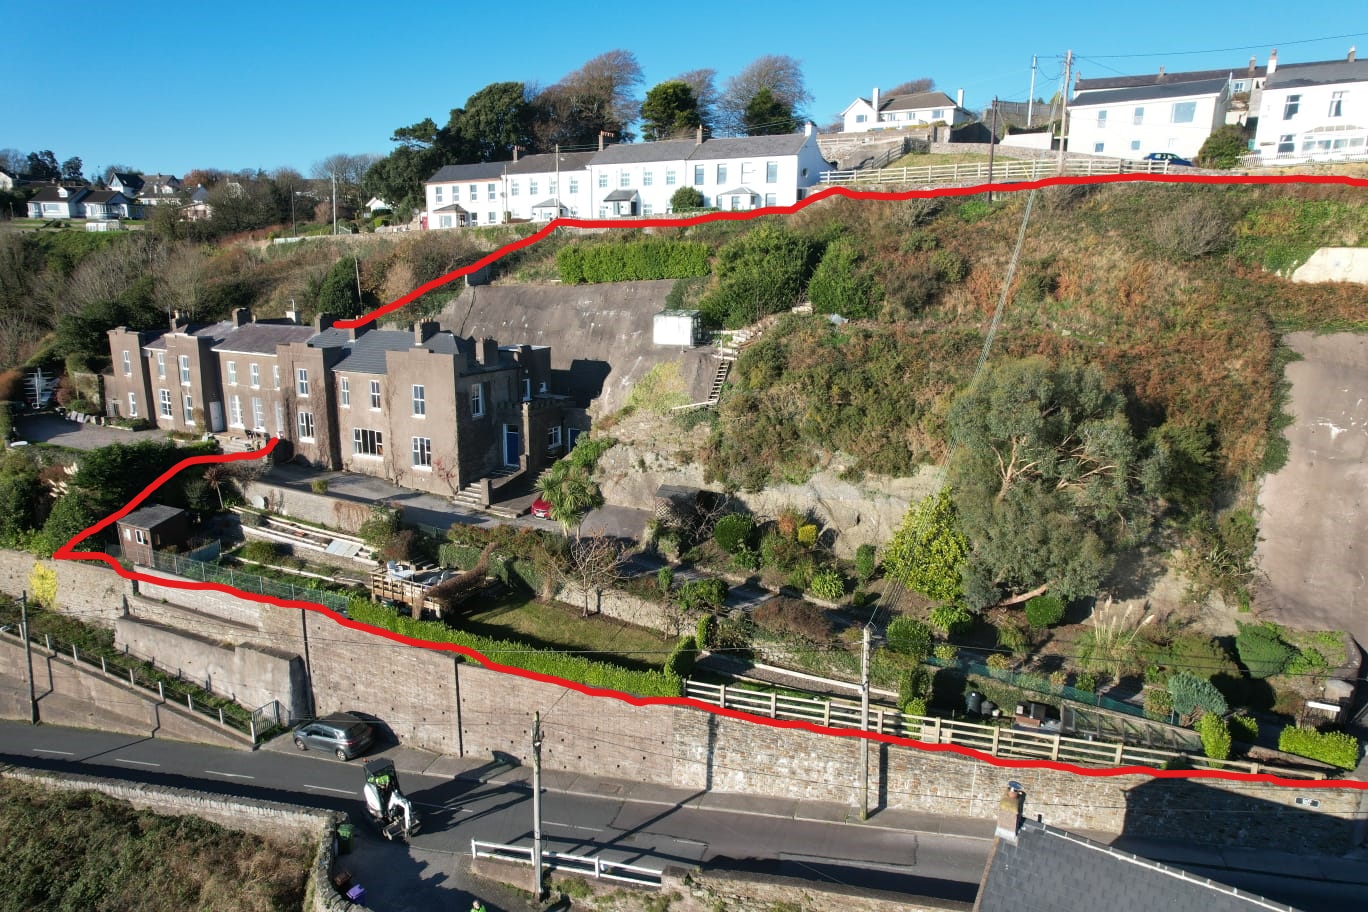 Period Home For Sale: Fort Lisle East, East Hill, Cobh, Co. Cork